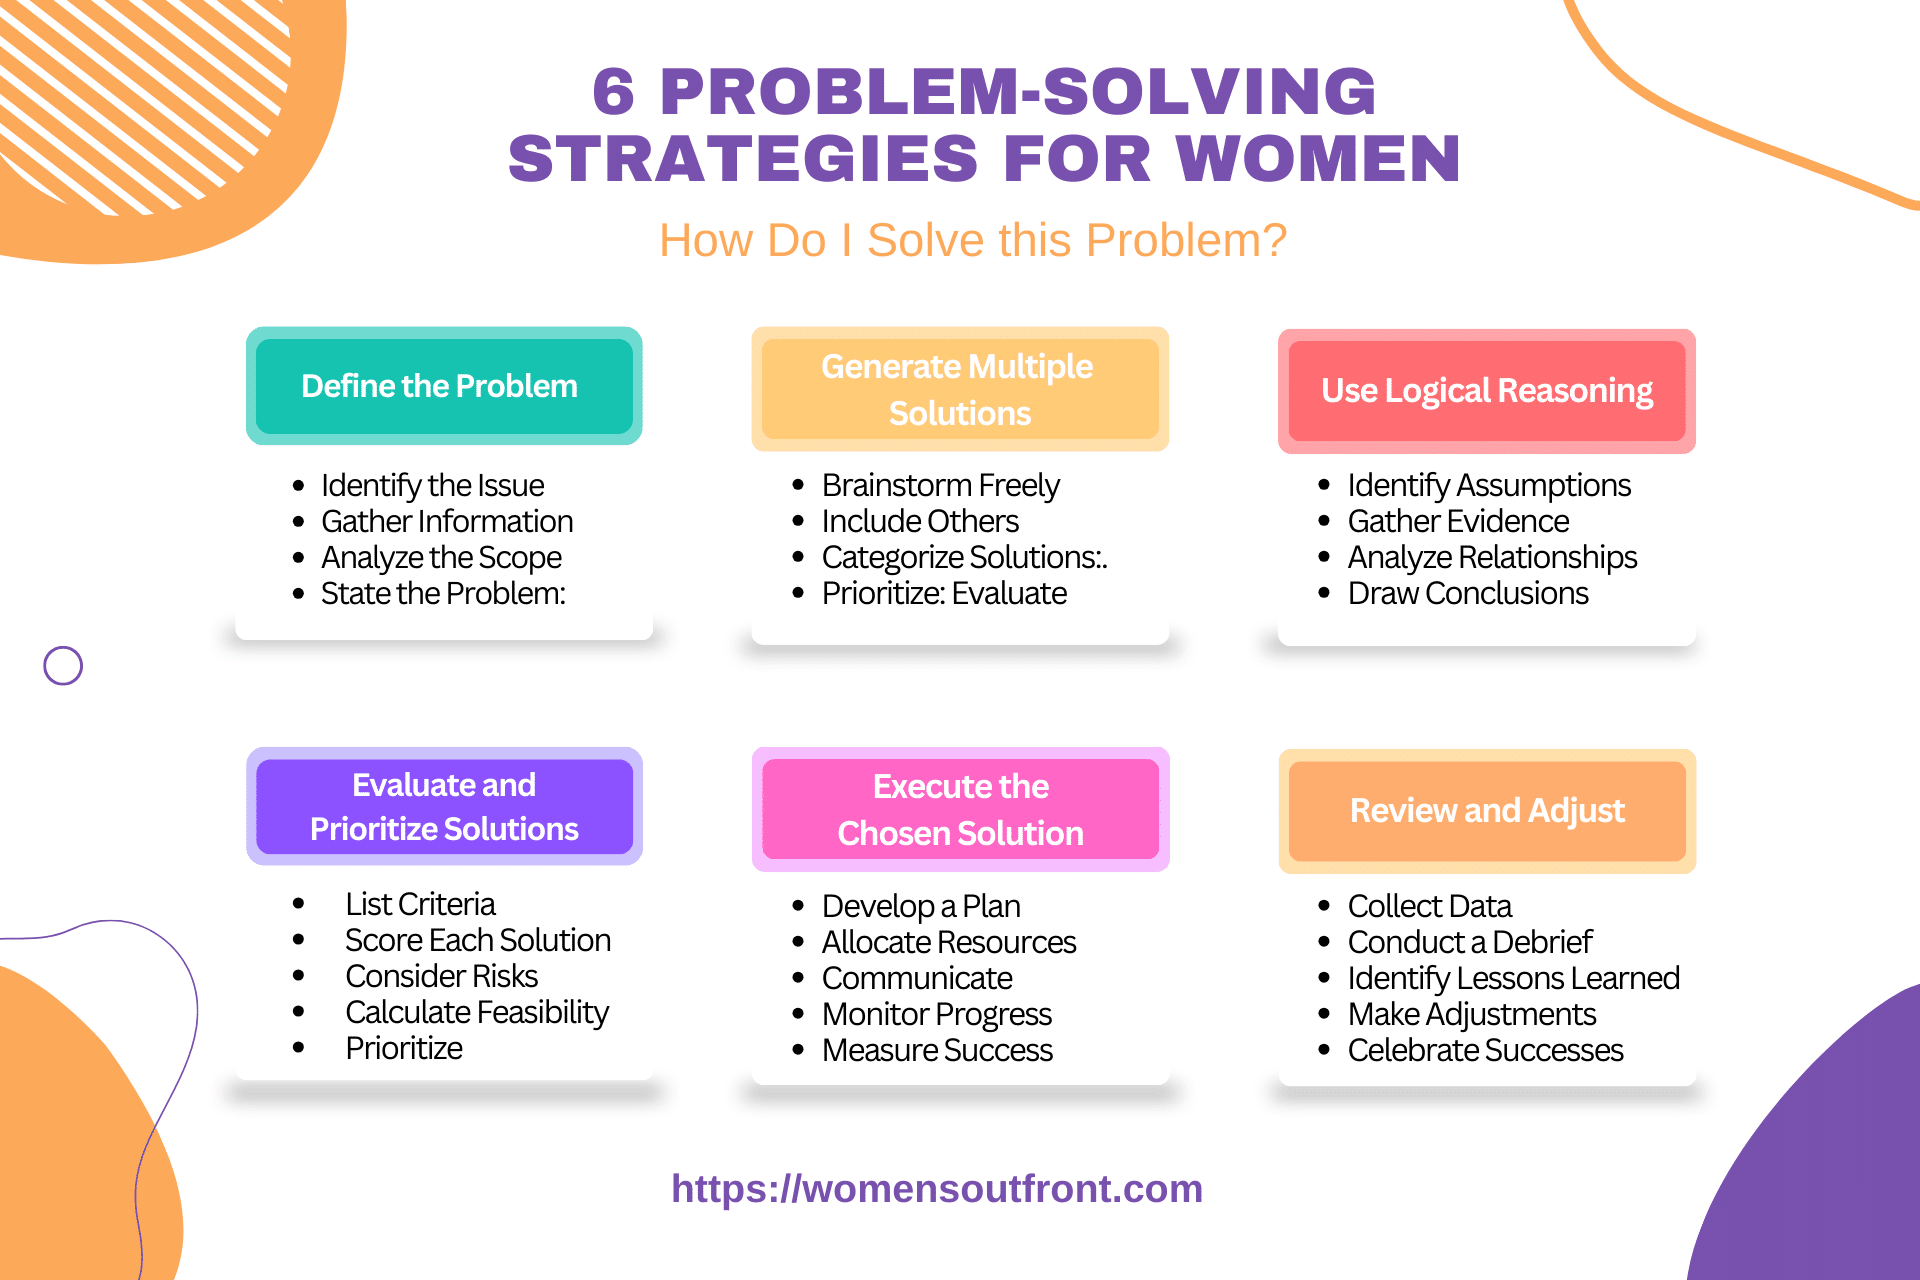 6 problem-solving strategies for women infographic